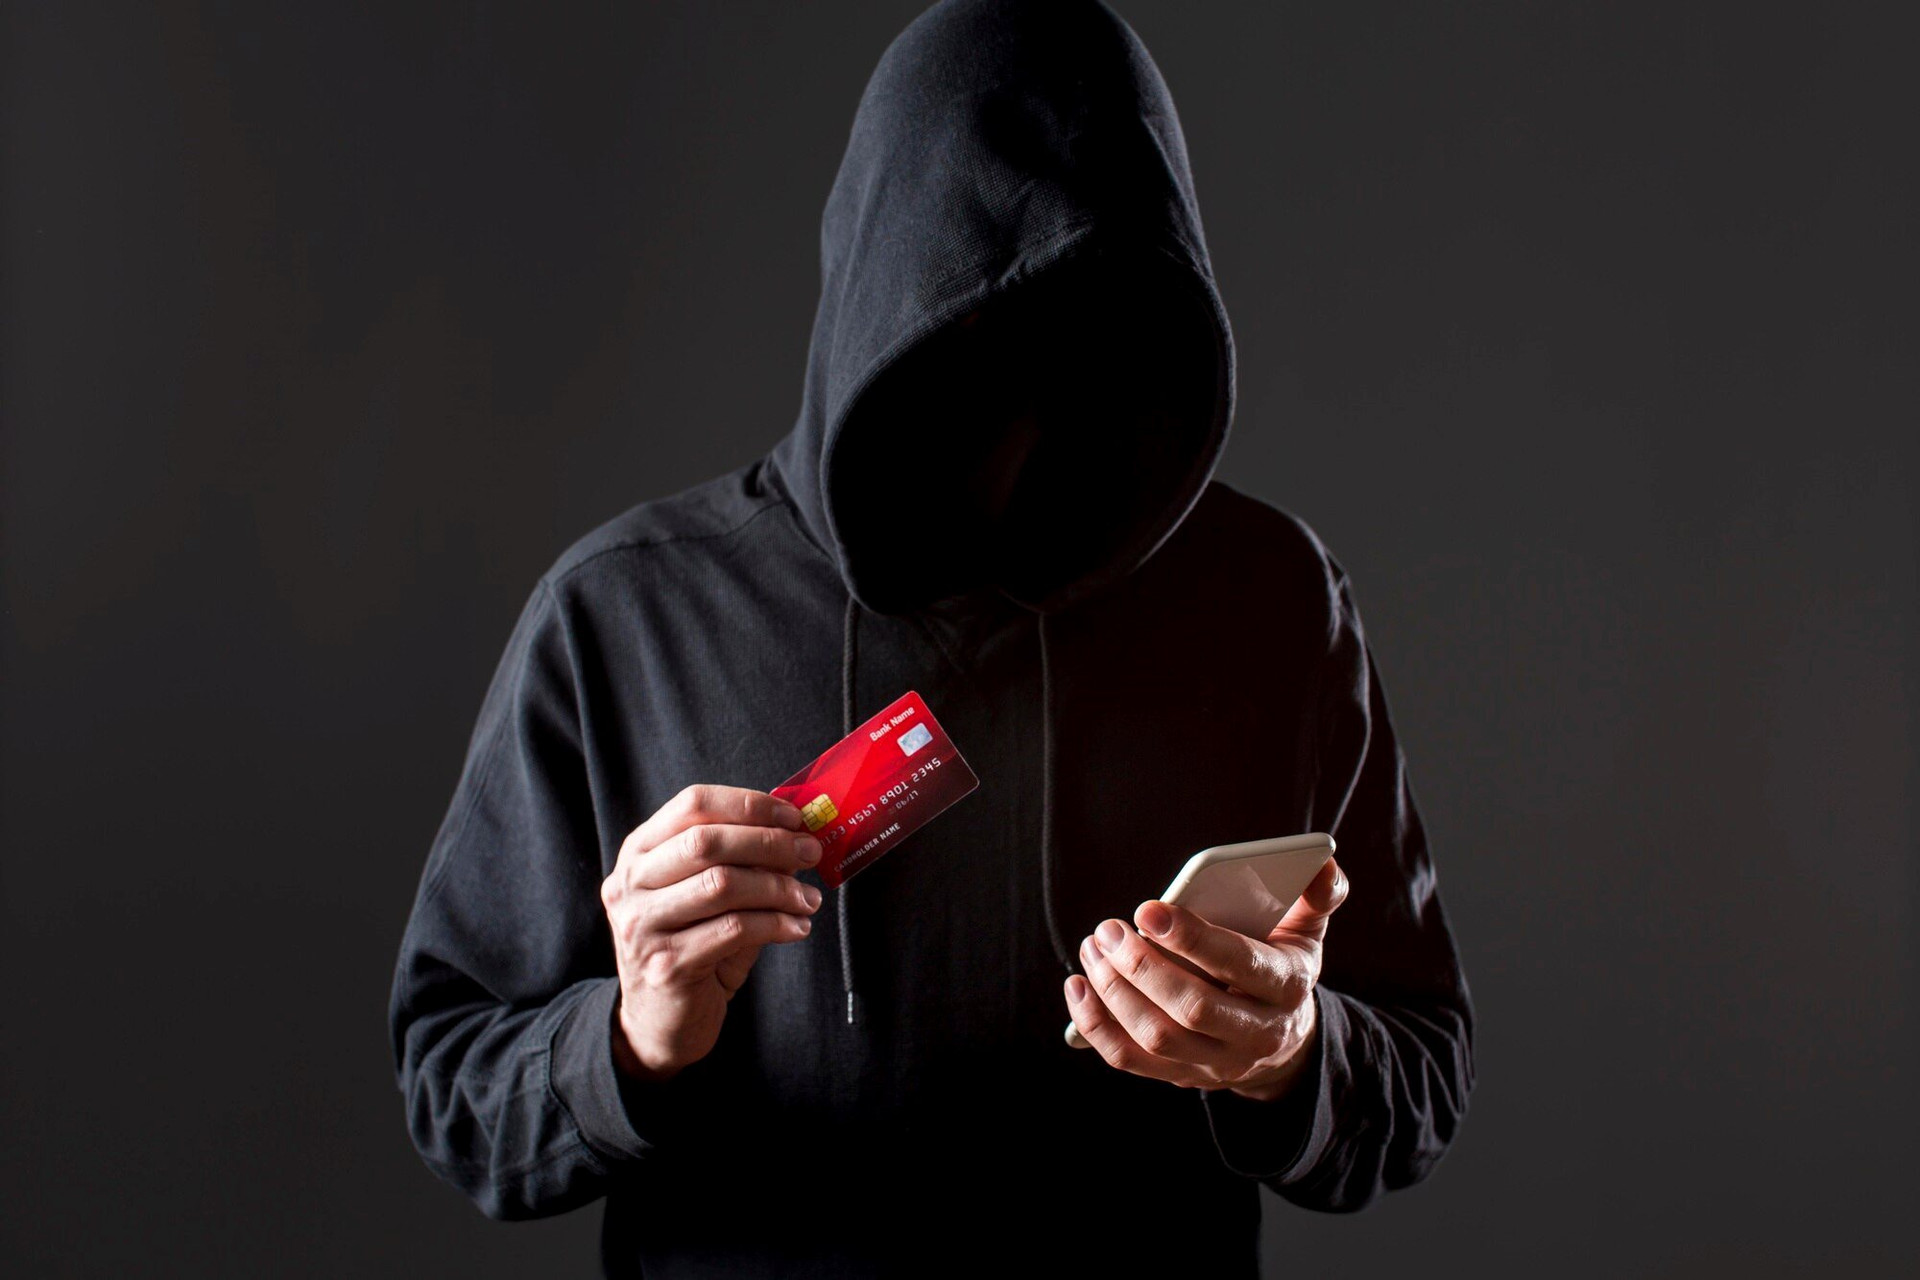 front-view-male-hacker-holding-smartphone-credit-card_23-2148578146.jpg